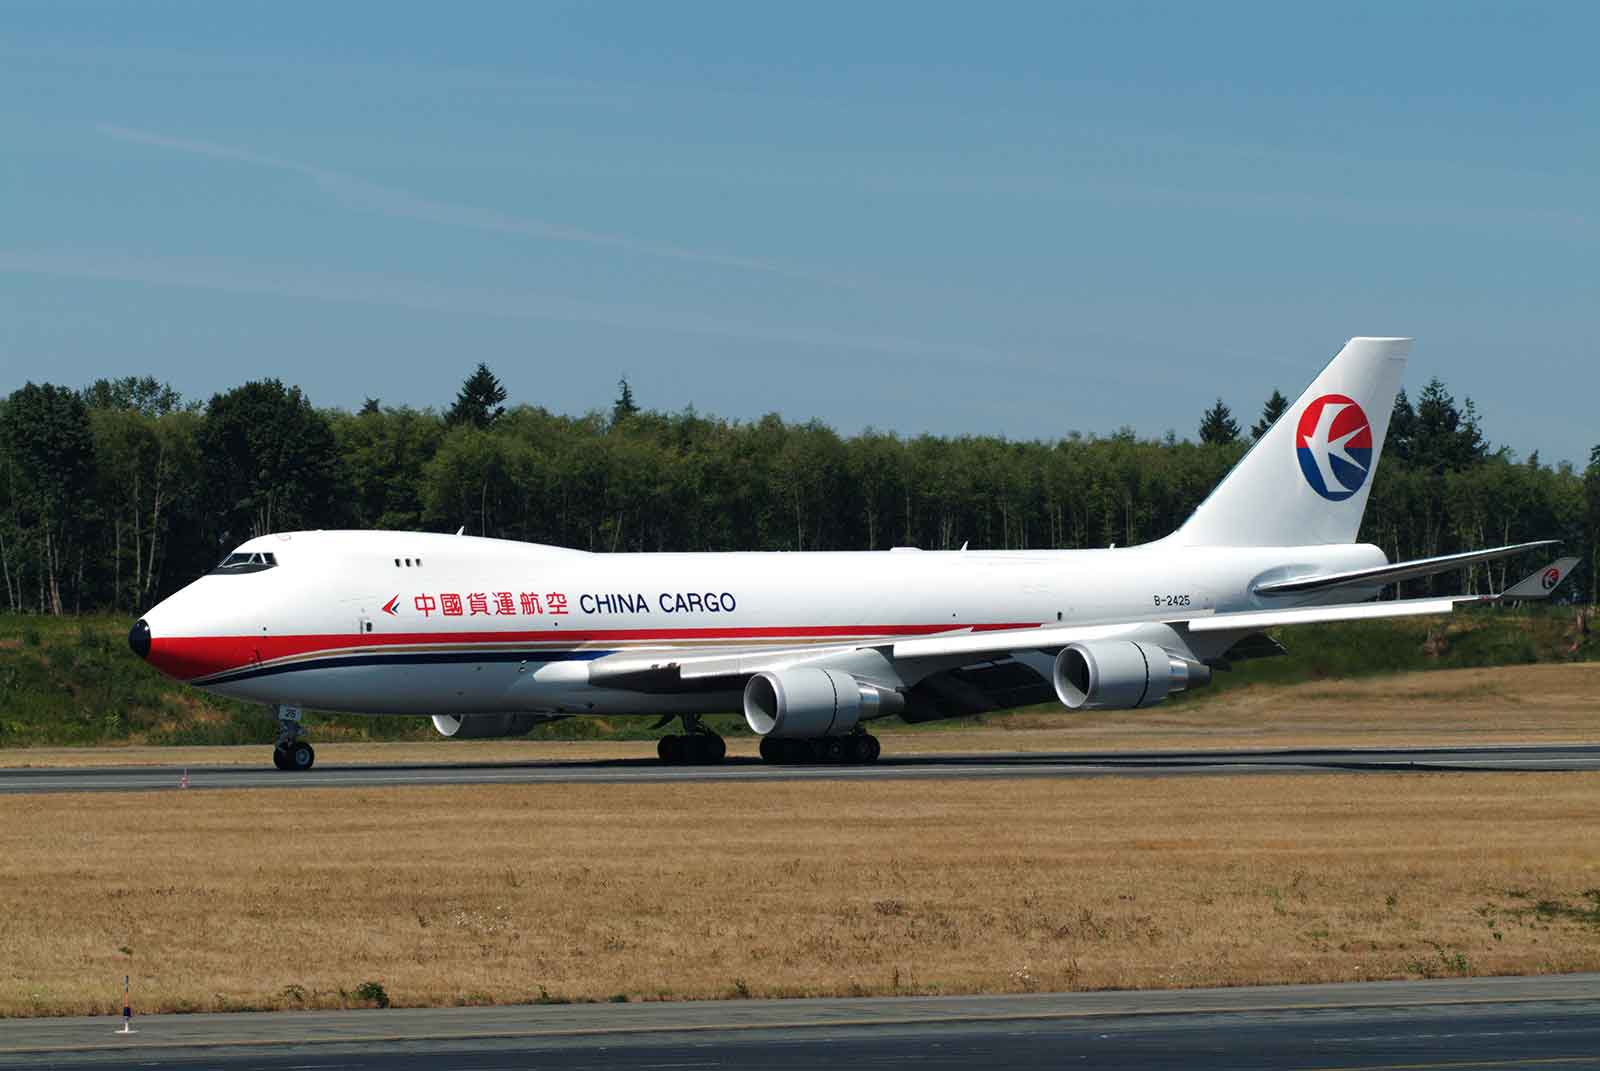 Boeing-Delivers-China-Cargo-Airlines-its-First-747-400ERF.jpg